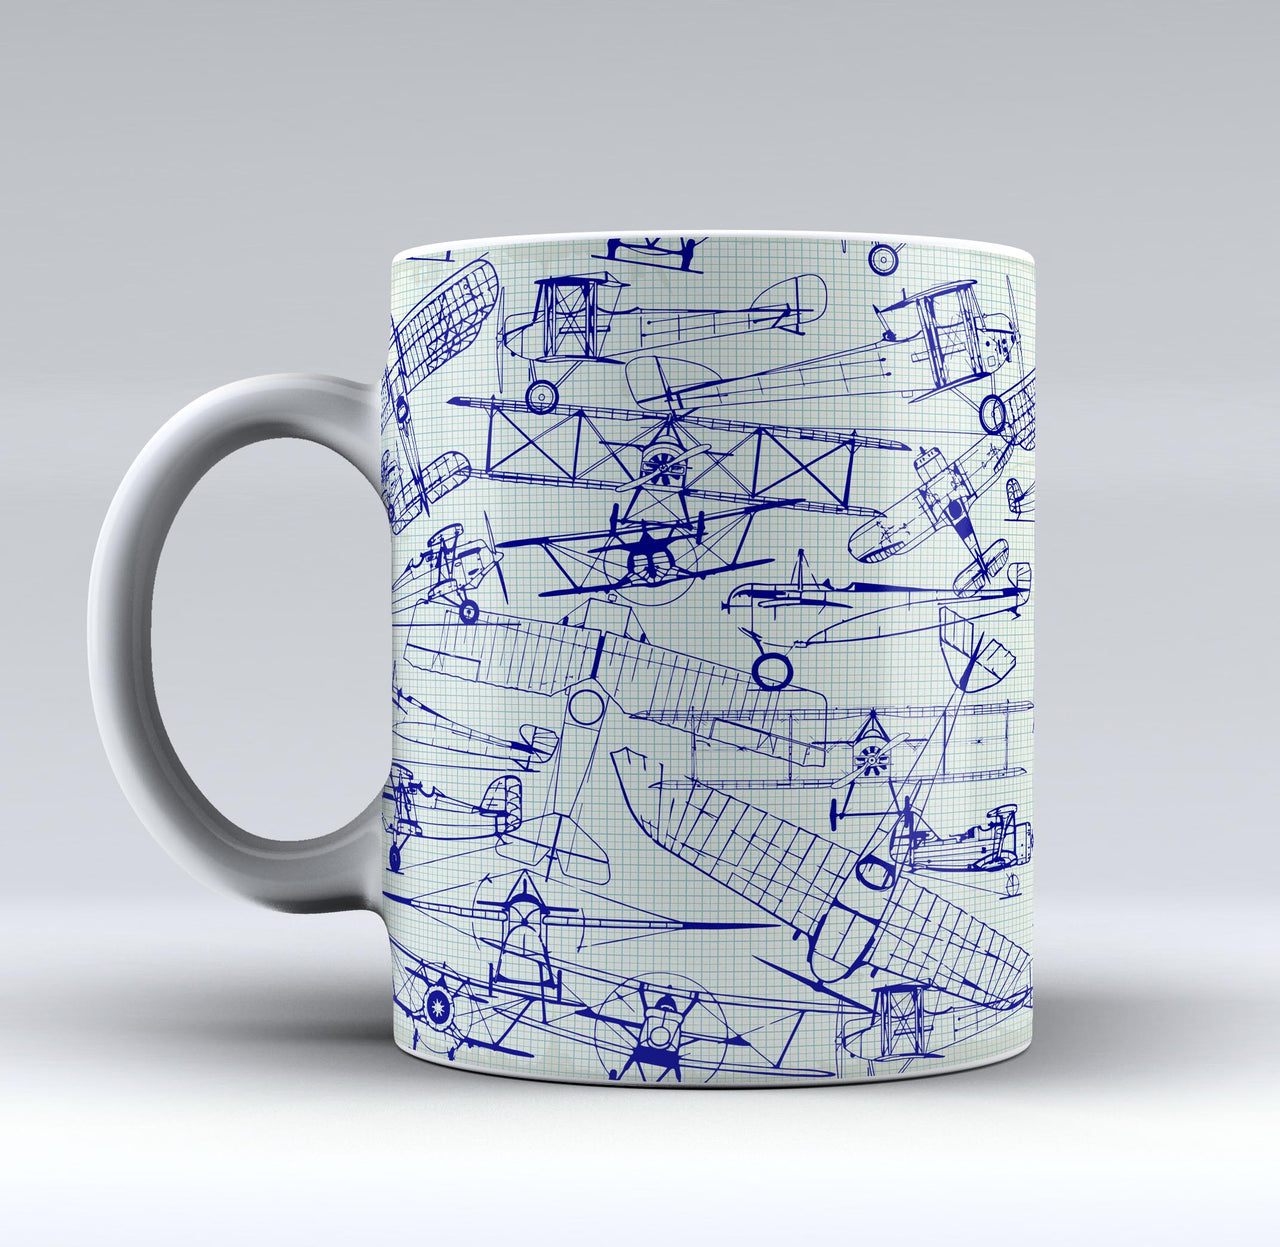 Amazing Drawings of Old Aircrafts Designed Mugs